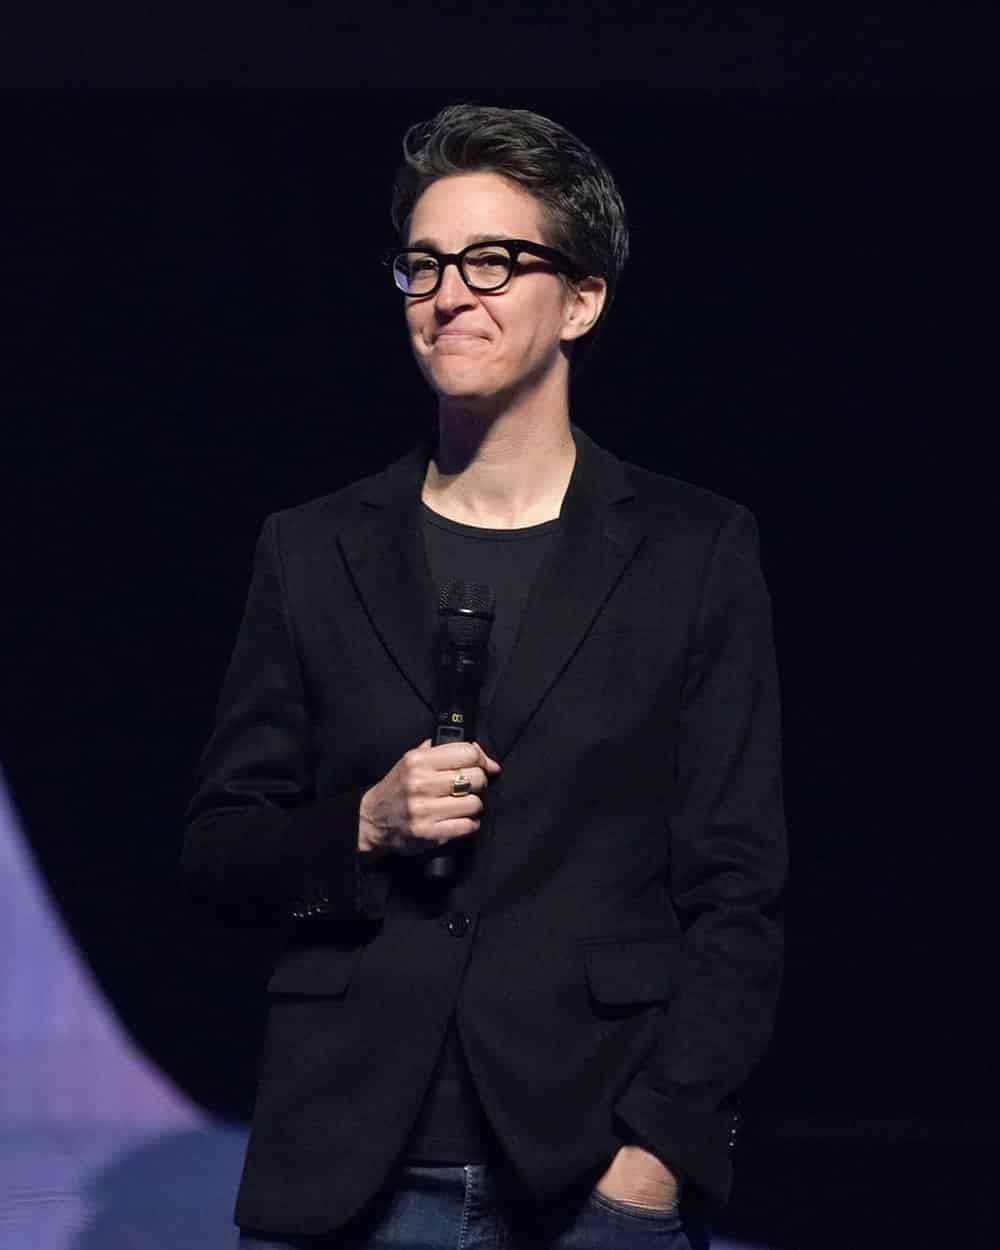 Rachel Maddow (Actress/Television Presenter) Wiki, Biography, Age, Boyfriend, Family, Facts and More - Wikifamouspeople